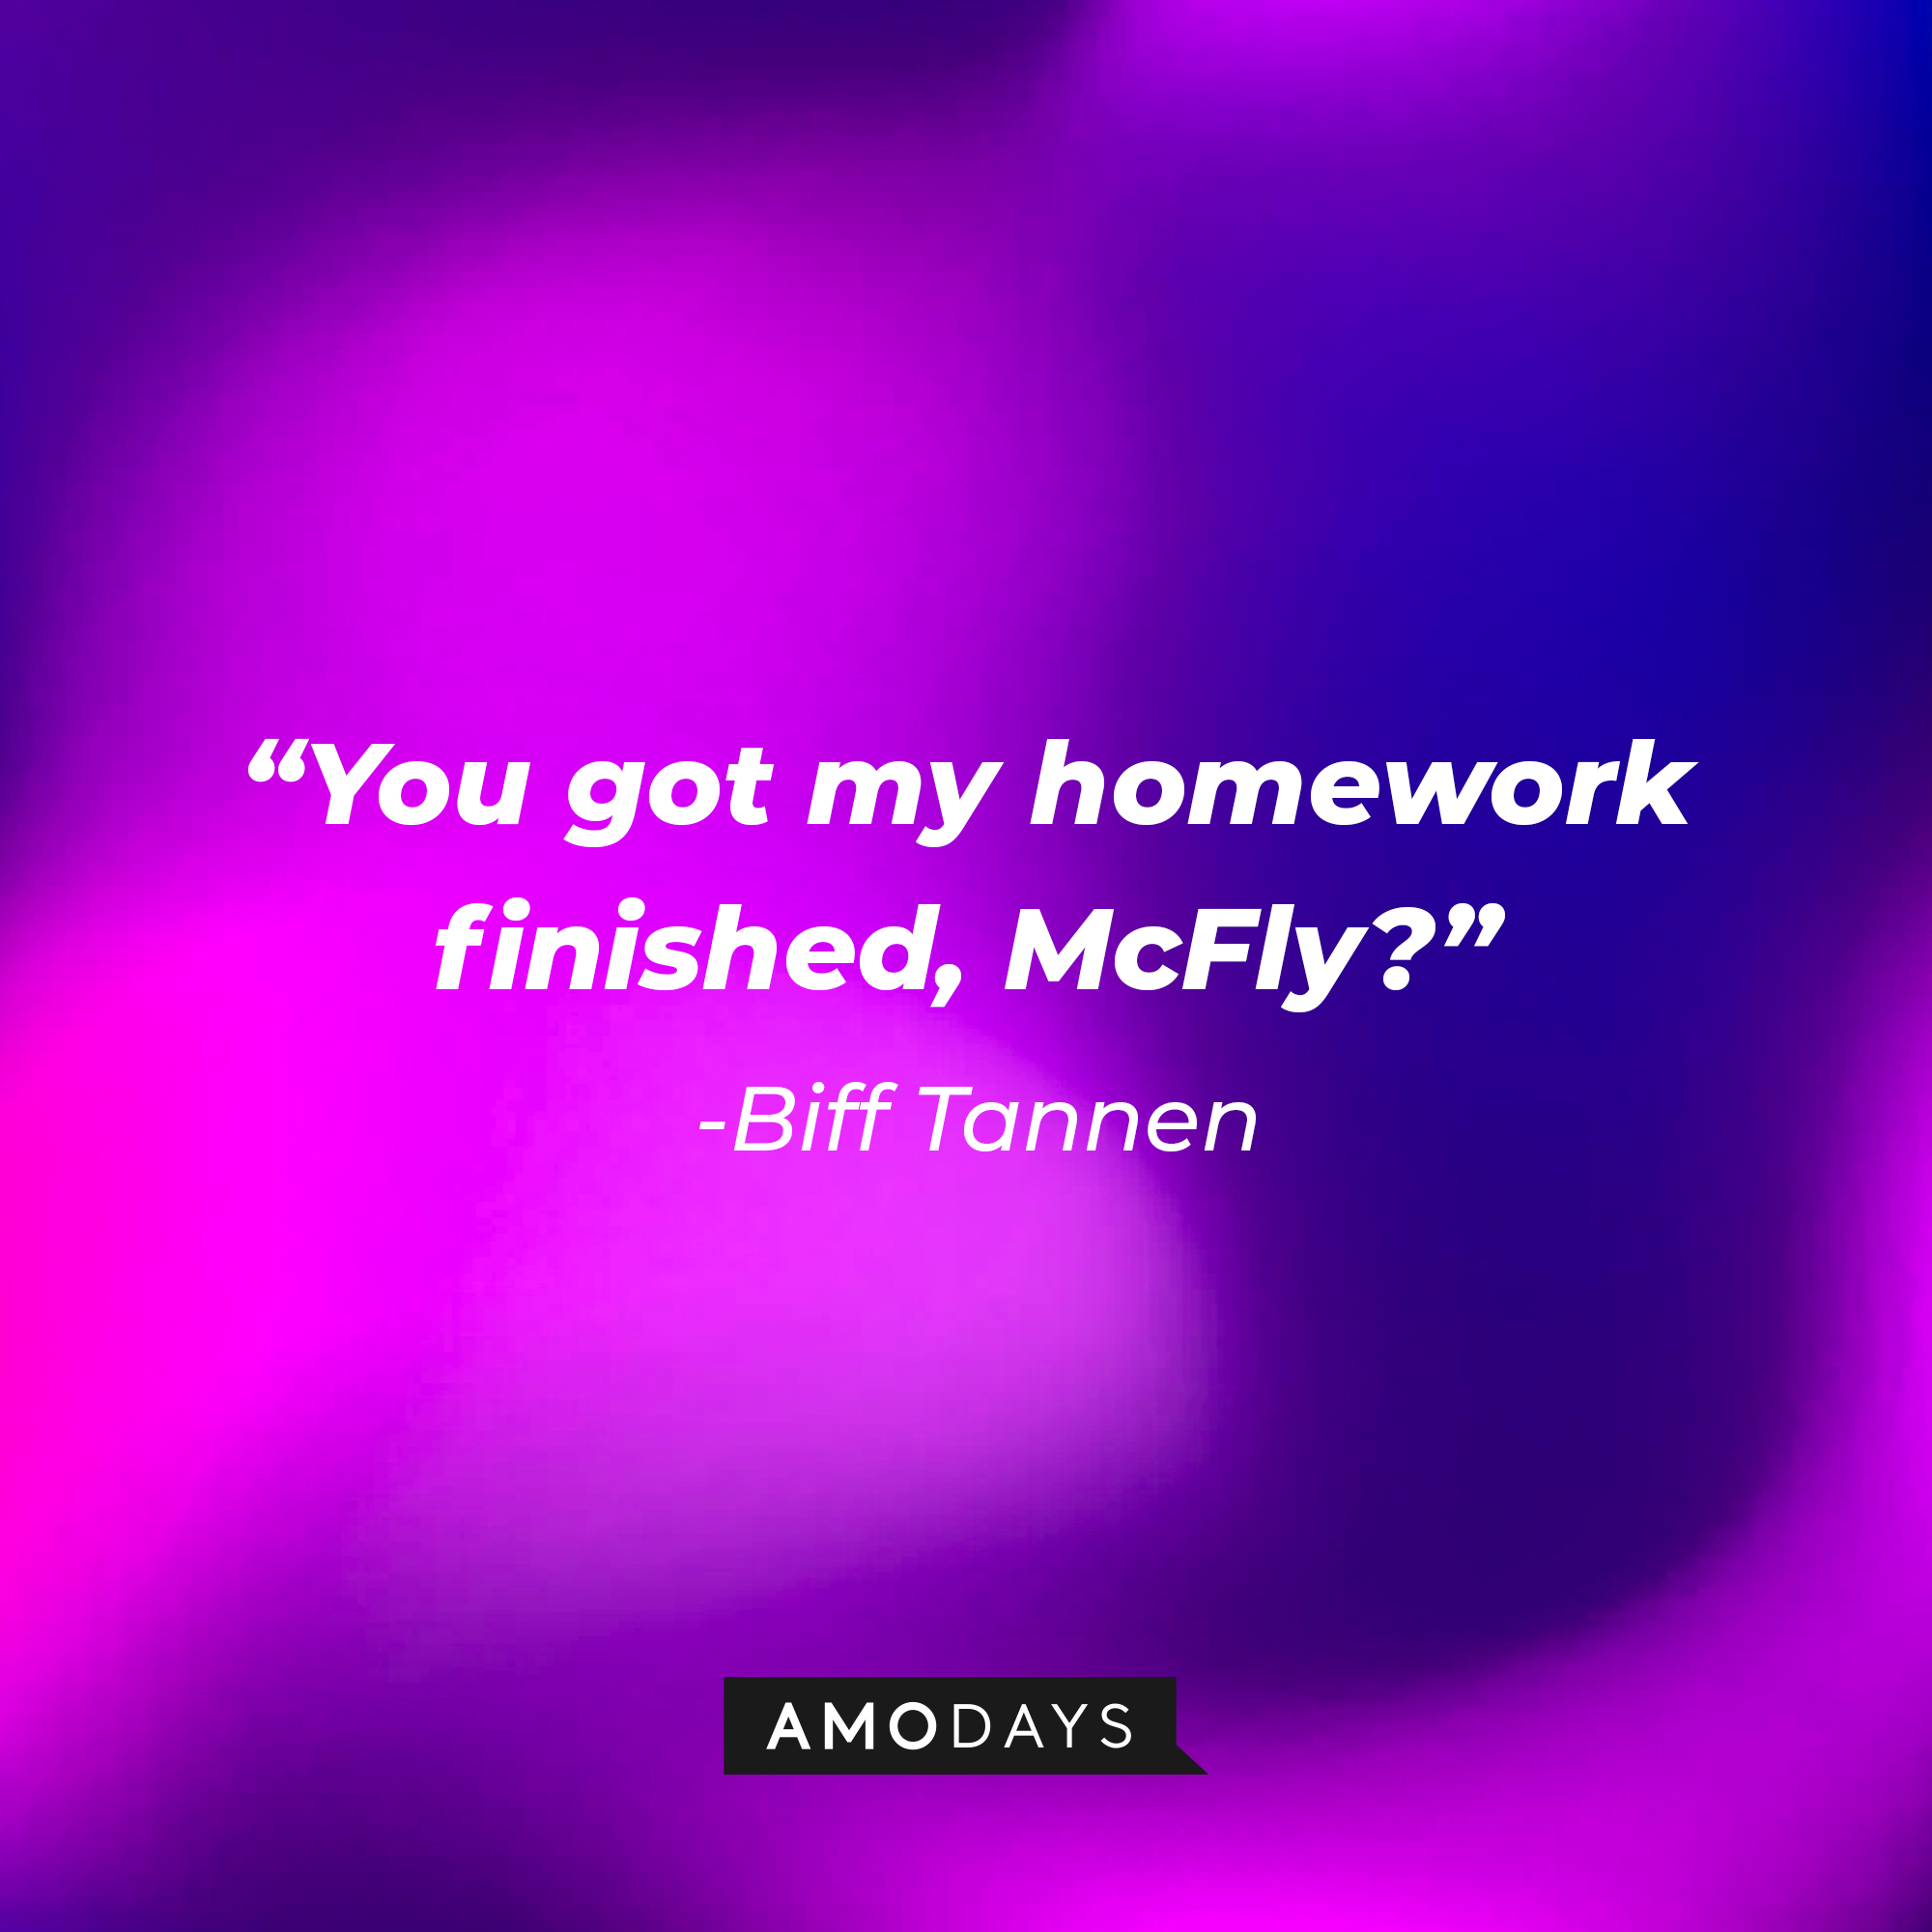 Biff Tannen’s quote: “You got my homework finished, McFly?” | Source: AmoDays